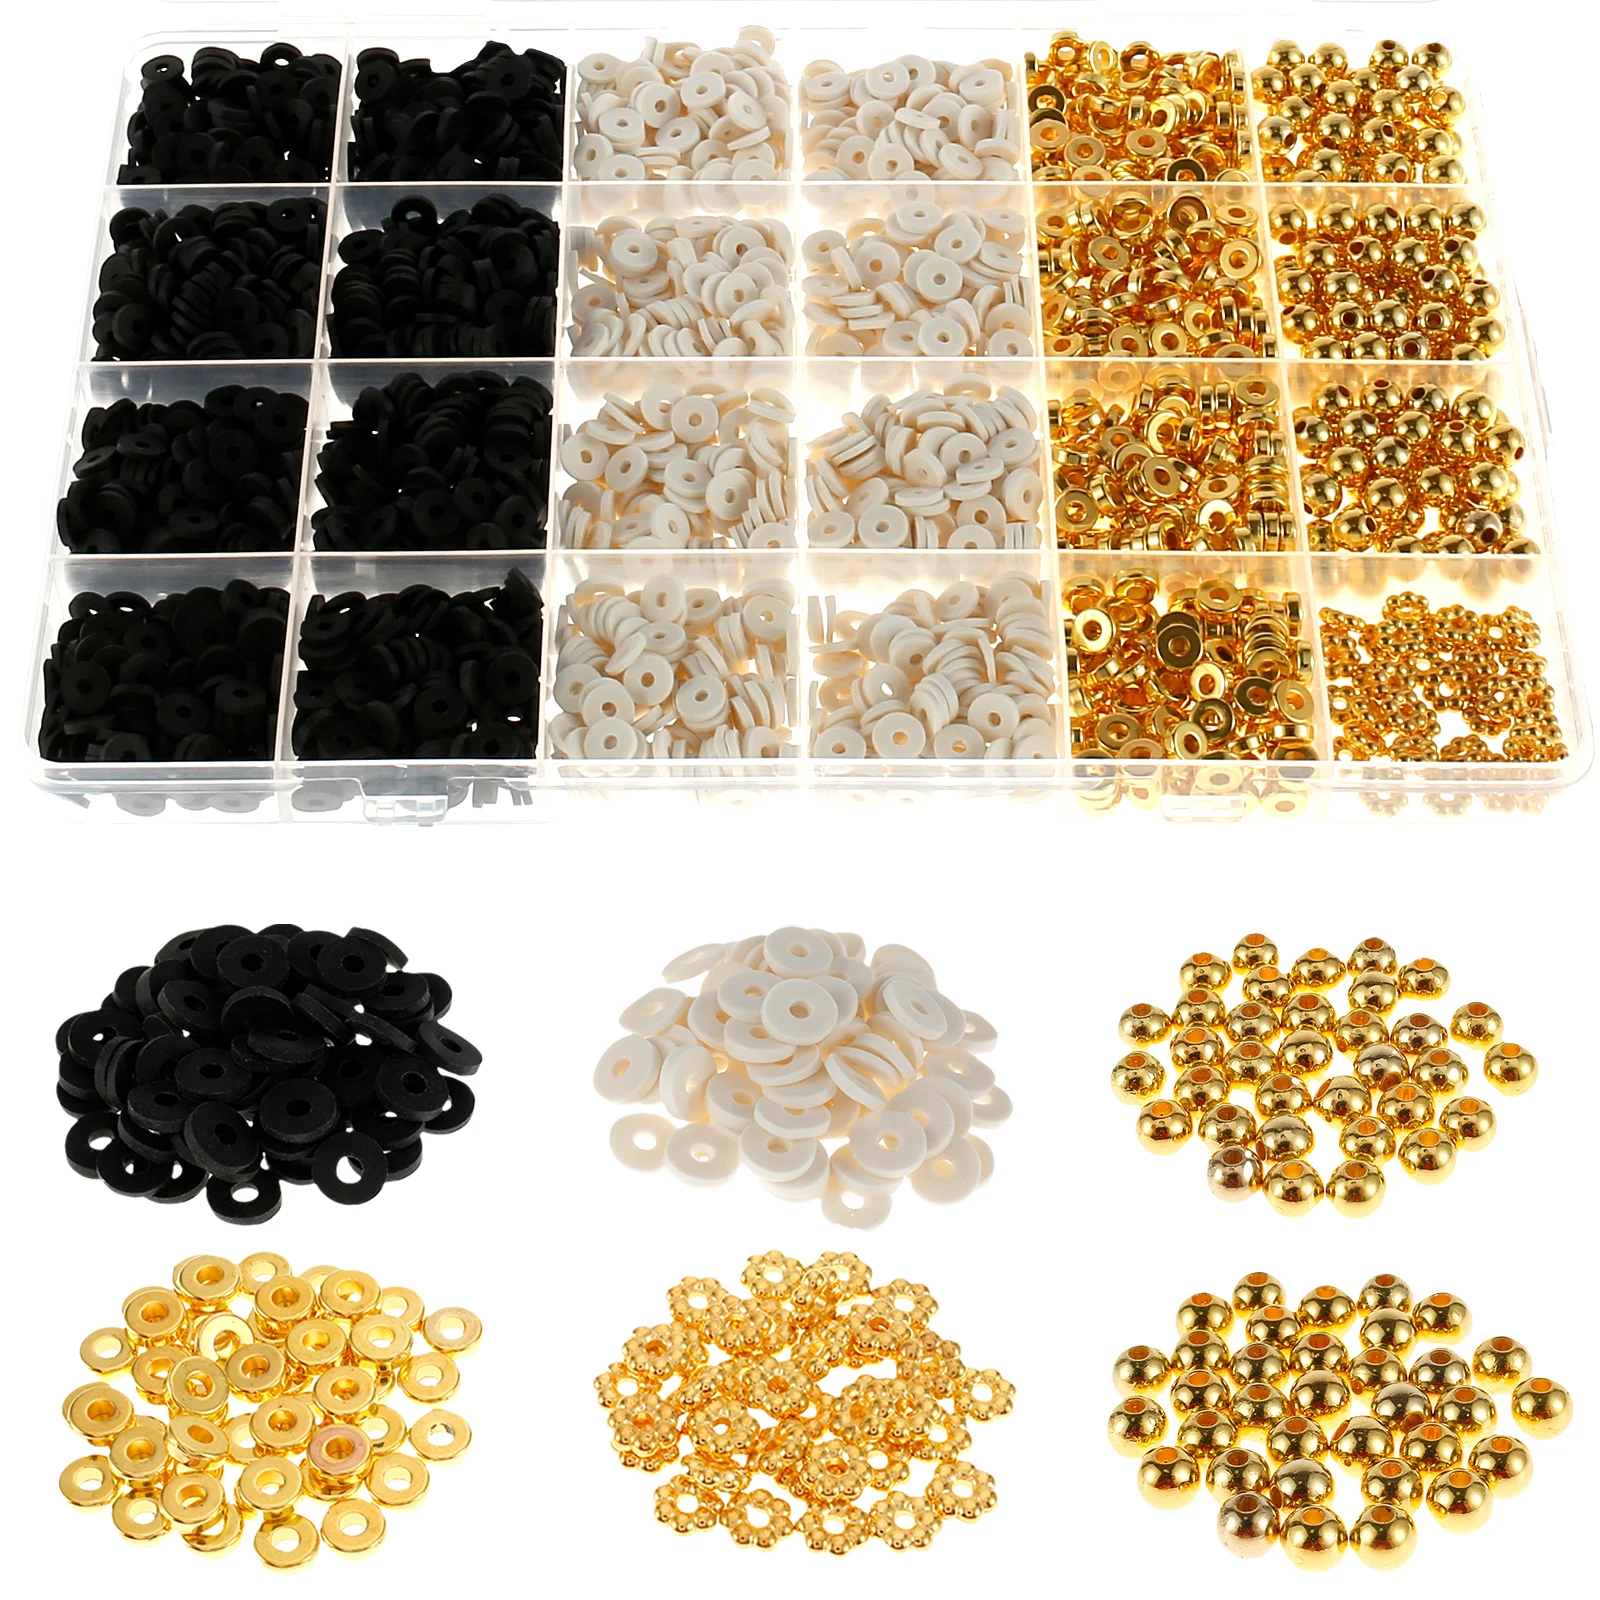 Bracelet Making Beads Kit for Girls Round Gold Beads Clear Storage Box Clay  Beads for Stackable Bracelets Making DIY Jewelry